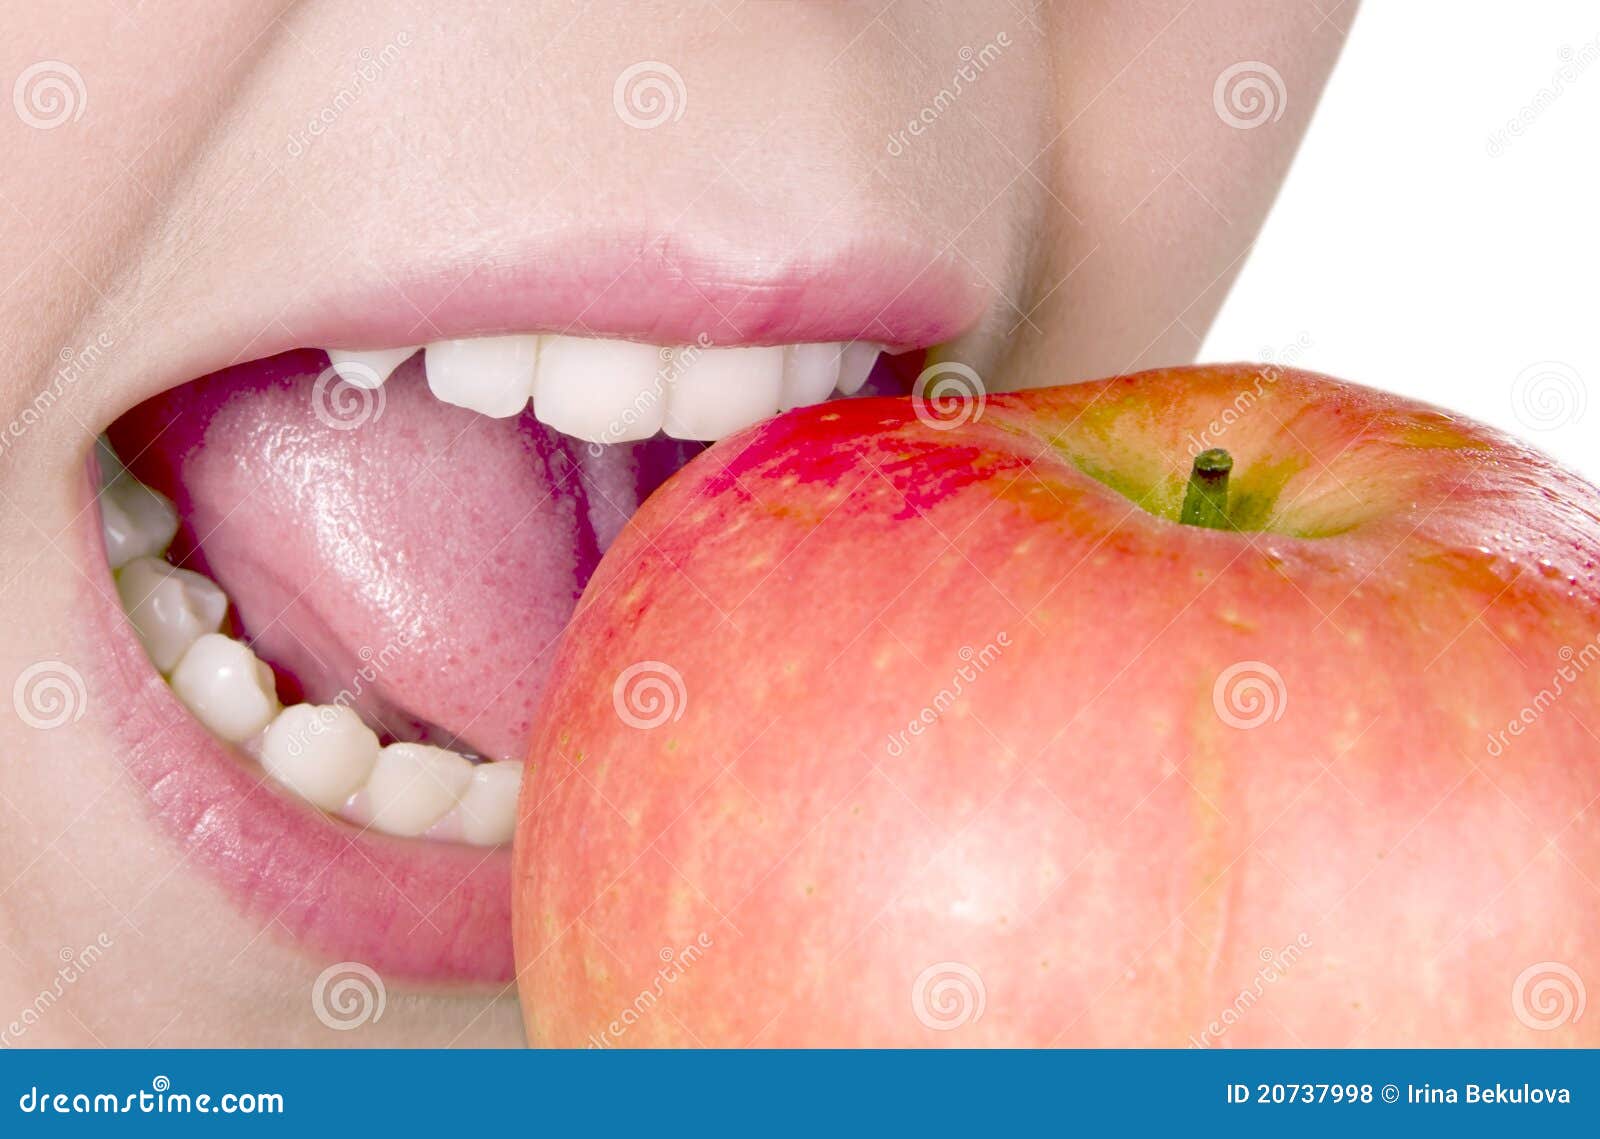 desire to eat an apple